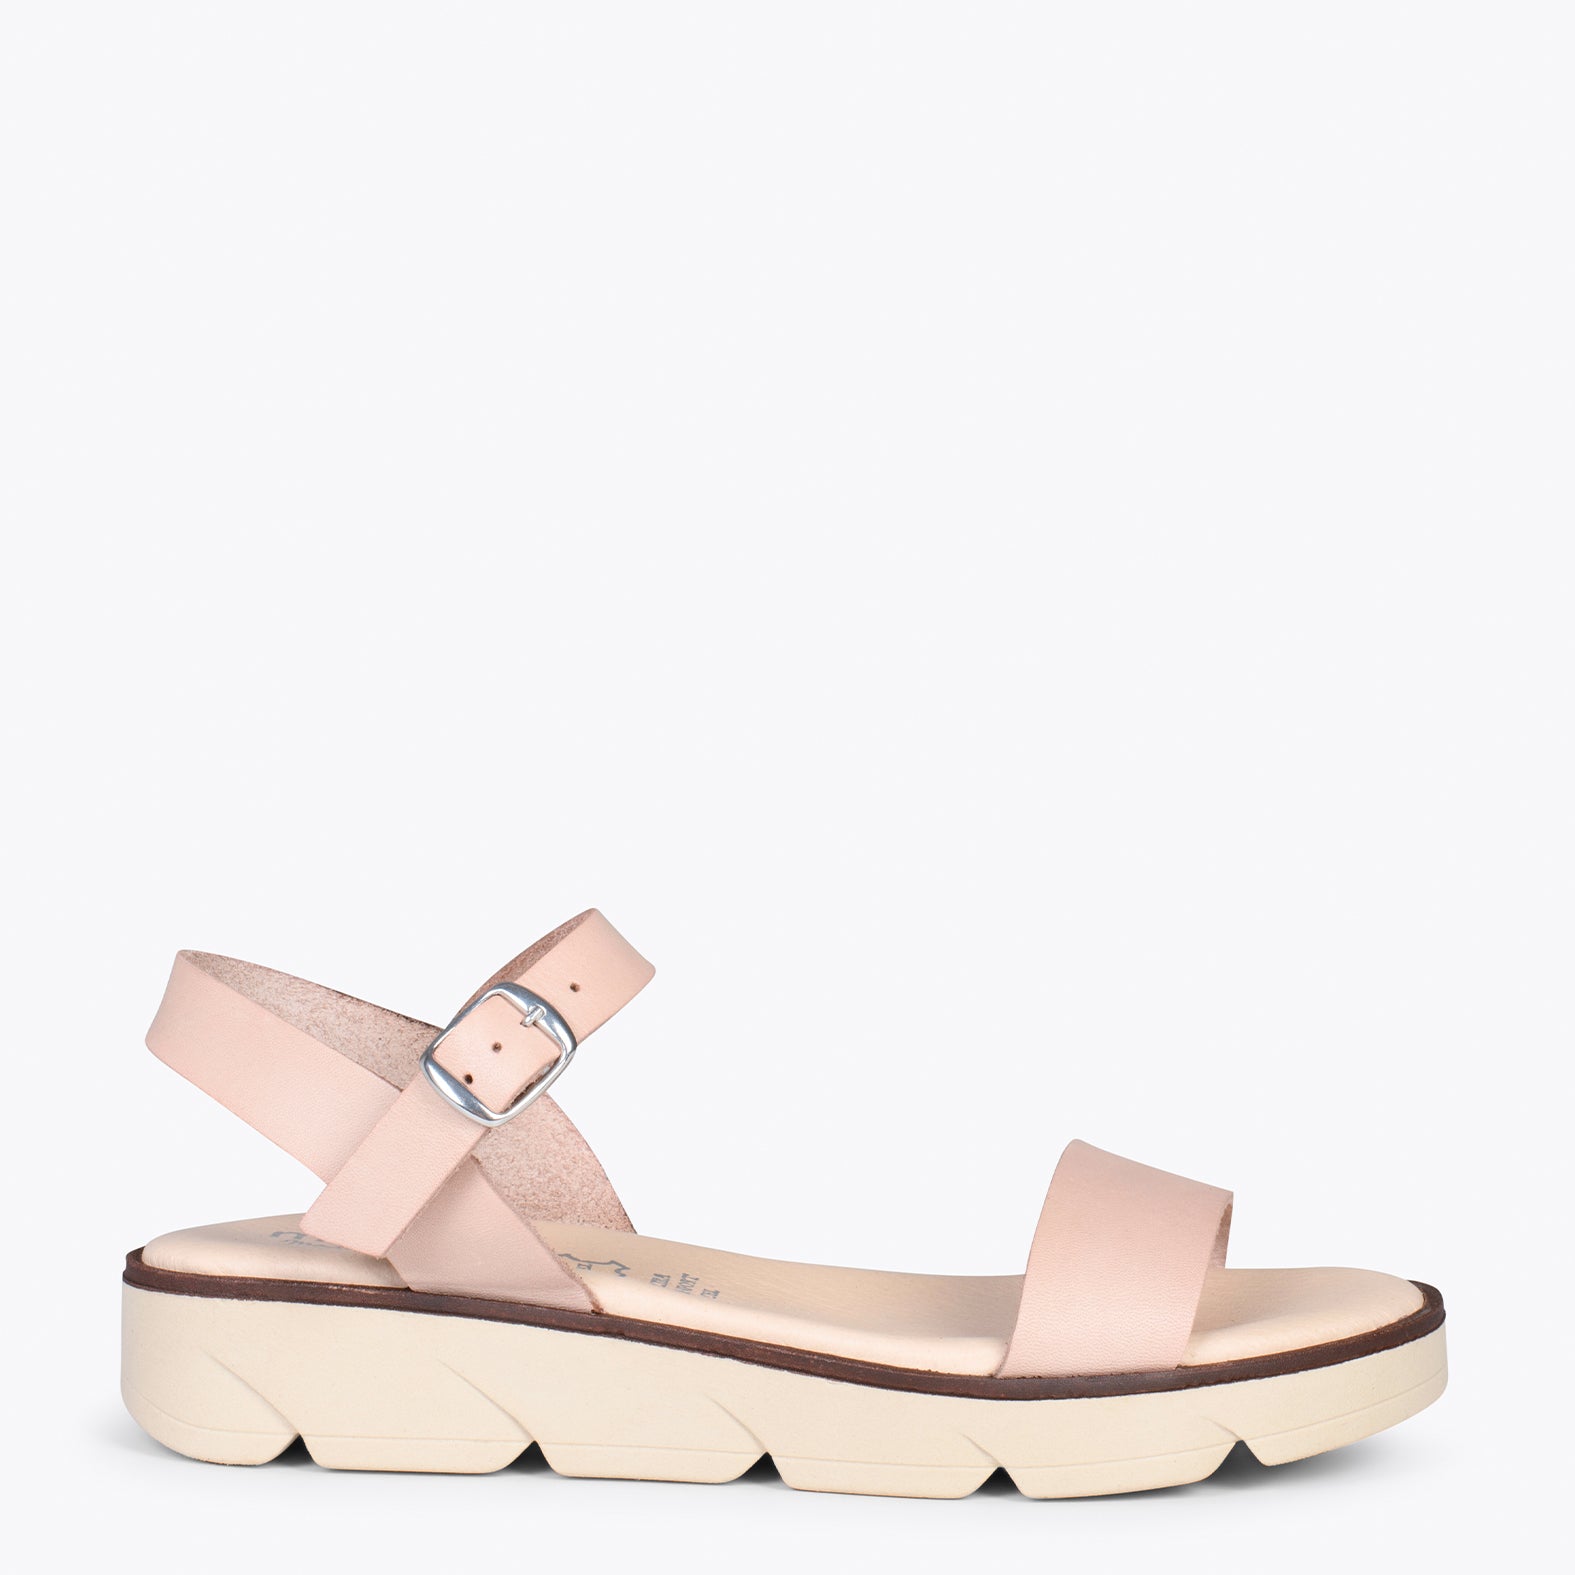 RIVER – NUDE leather flat sandals with wedge